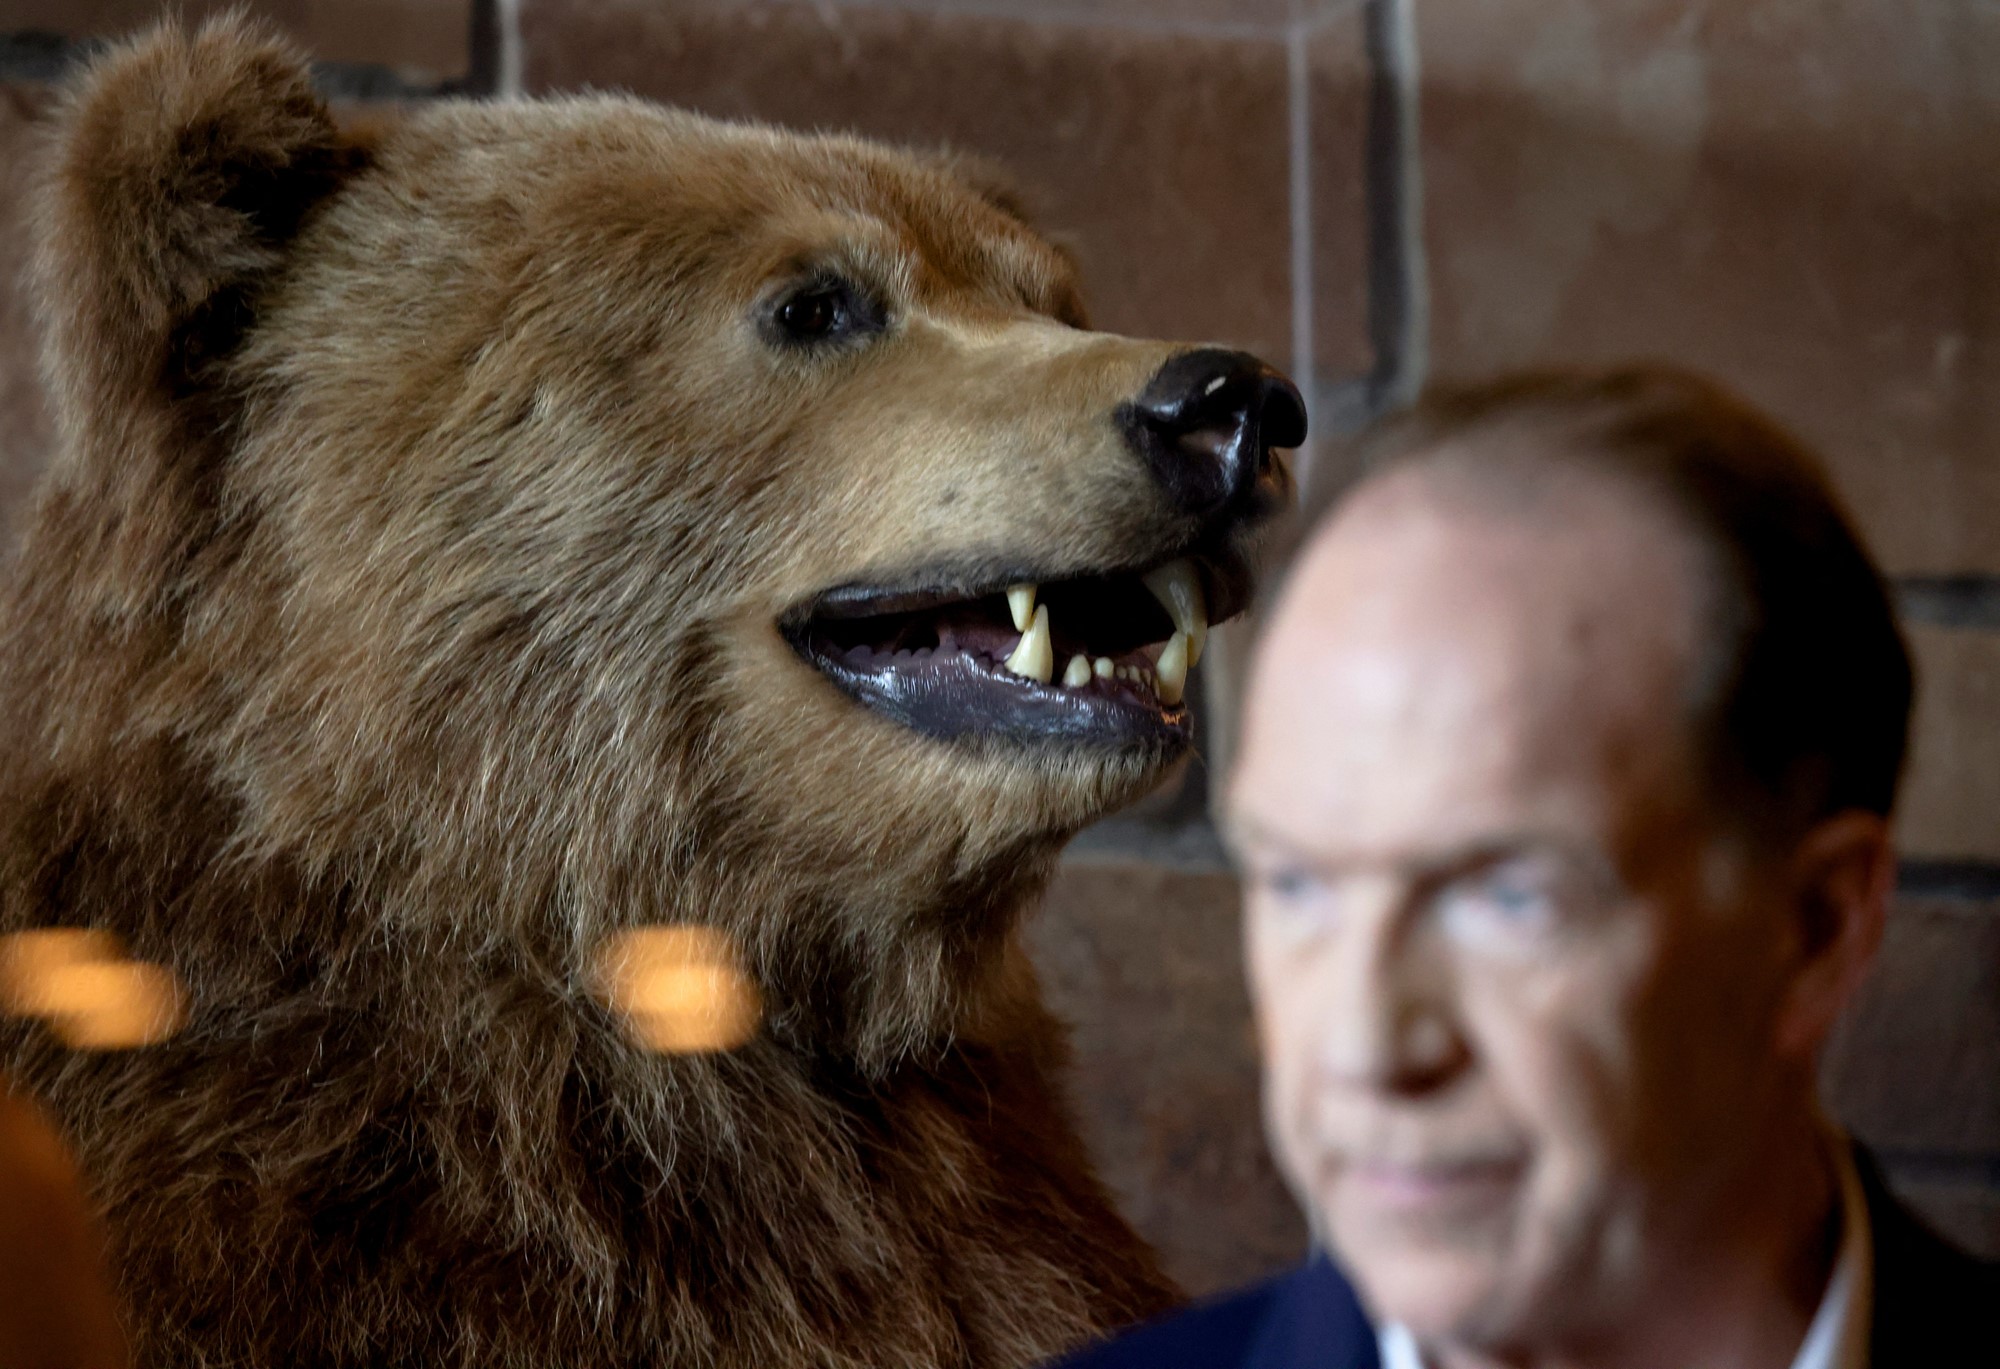 An in-focus shot of a taxidermied grizzly bear with a man out of focus.